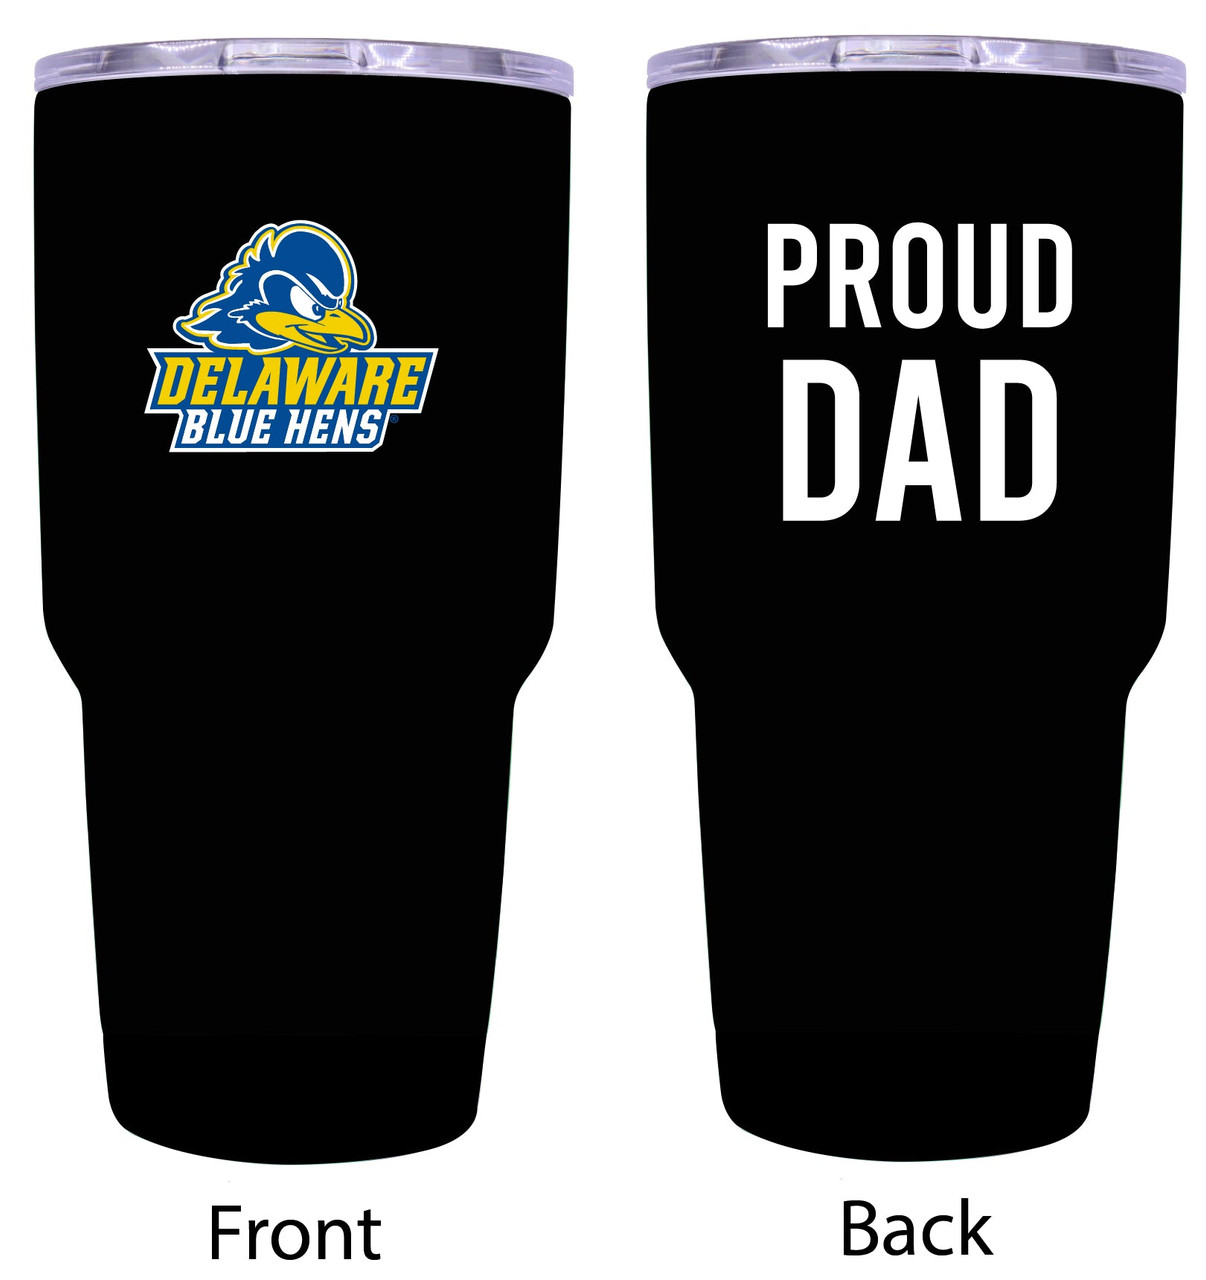 Delaware Blue Hens Proud Dad 24 oz Insulated Stainless Steel Tumblers Black.